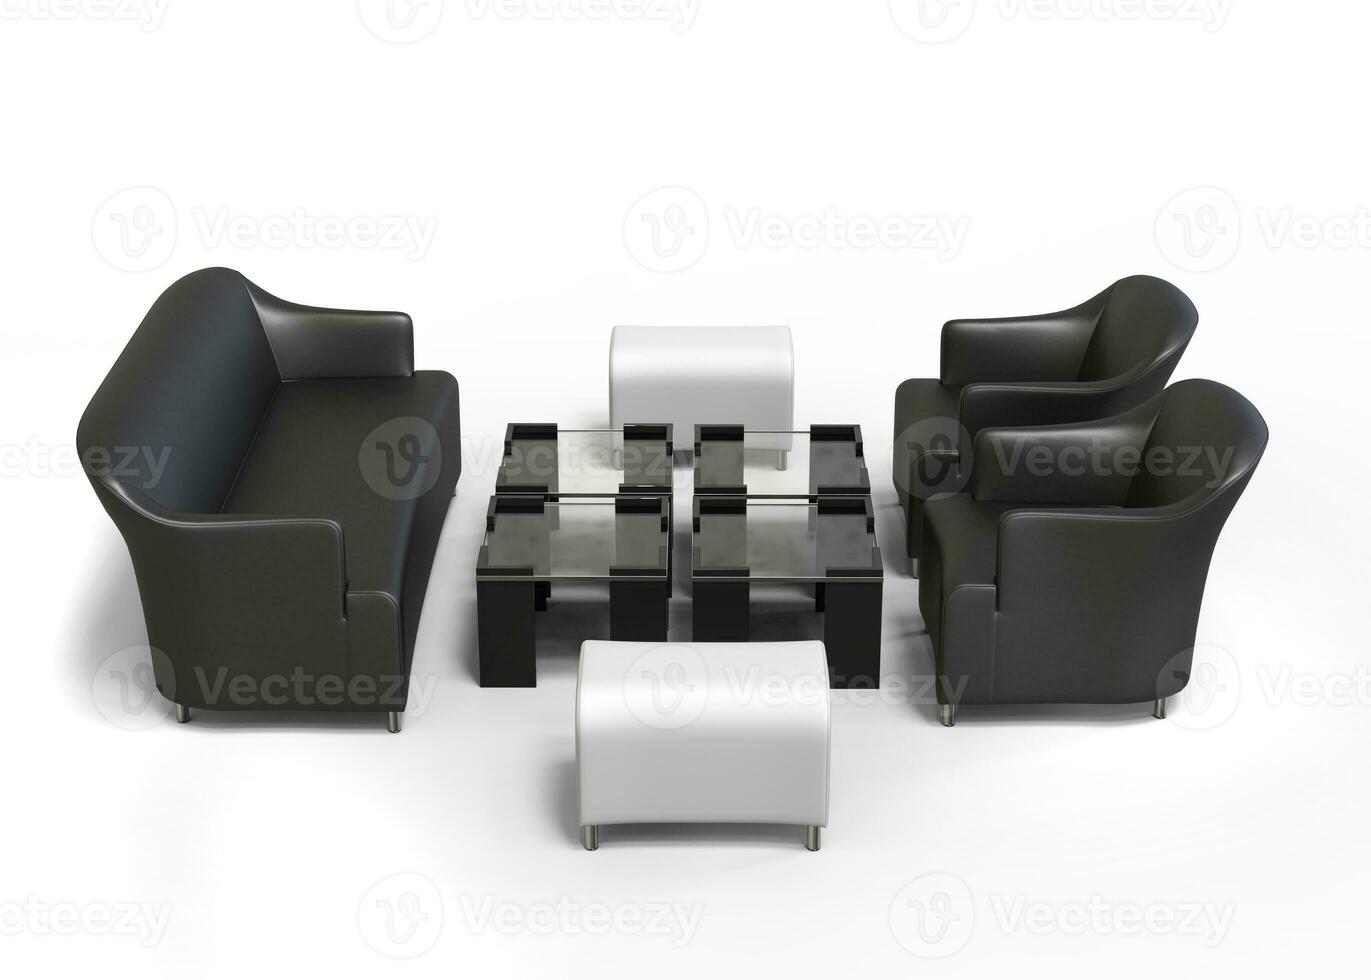 Living room set - sofa, two armchairs, coffee tables and ottomans - top view - 3D Render - isolated on white background photo